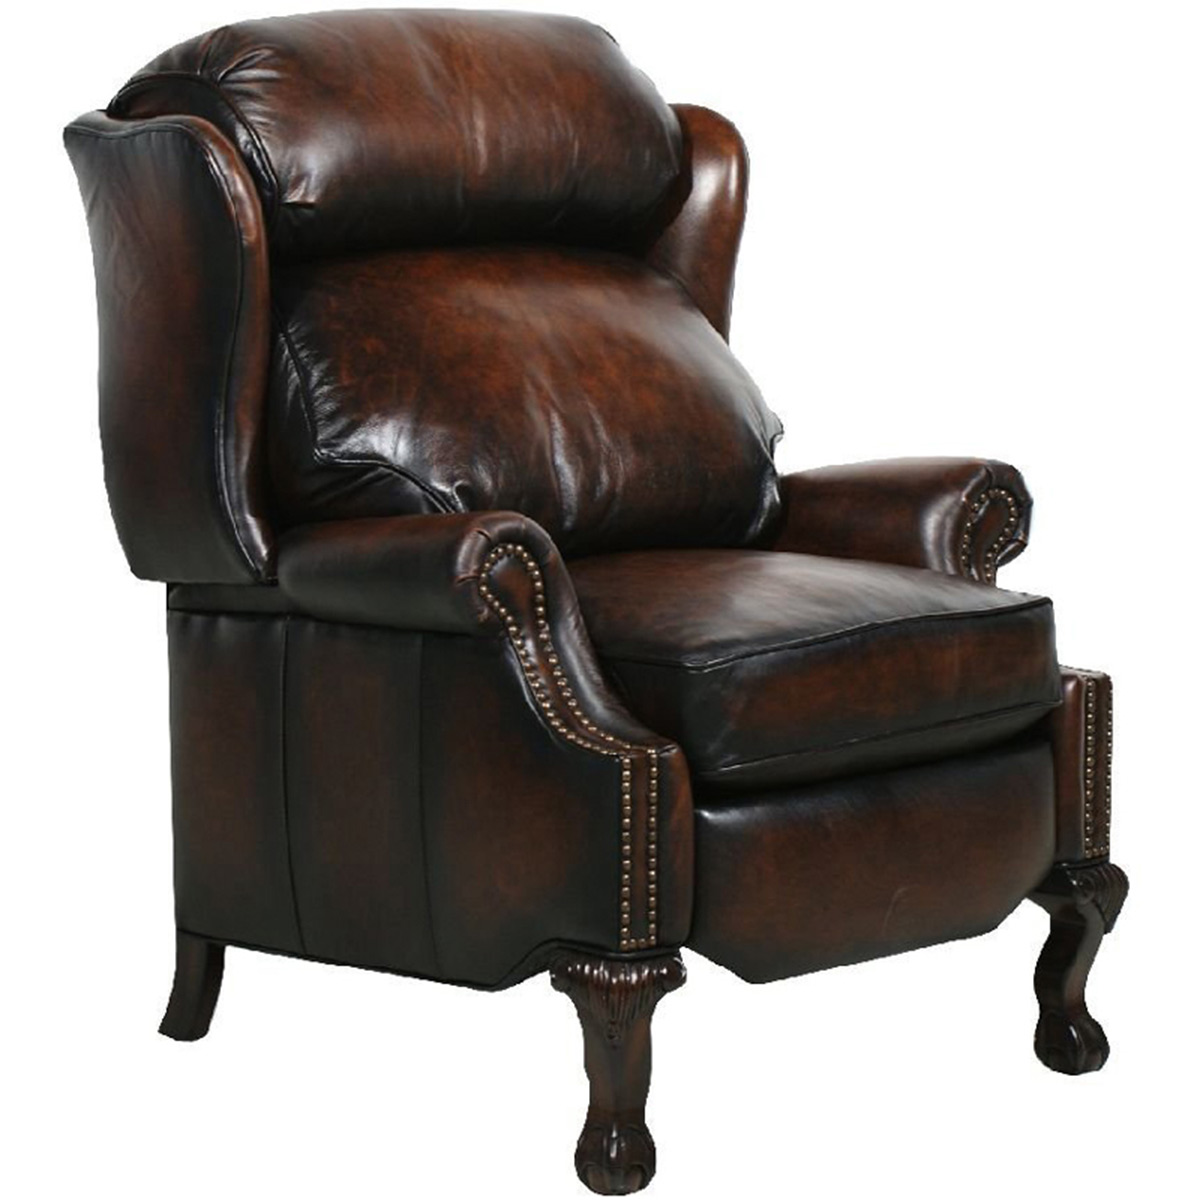 Barcalounger Danbury Power Recliner Chair - Stetson Coffee/All Leather